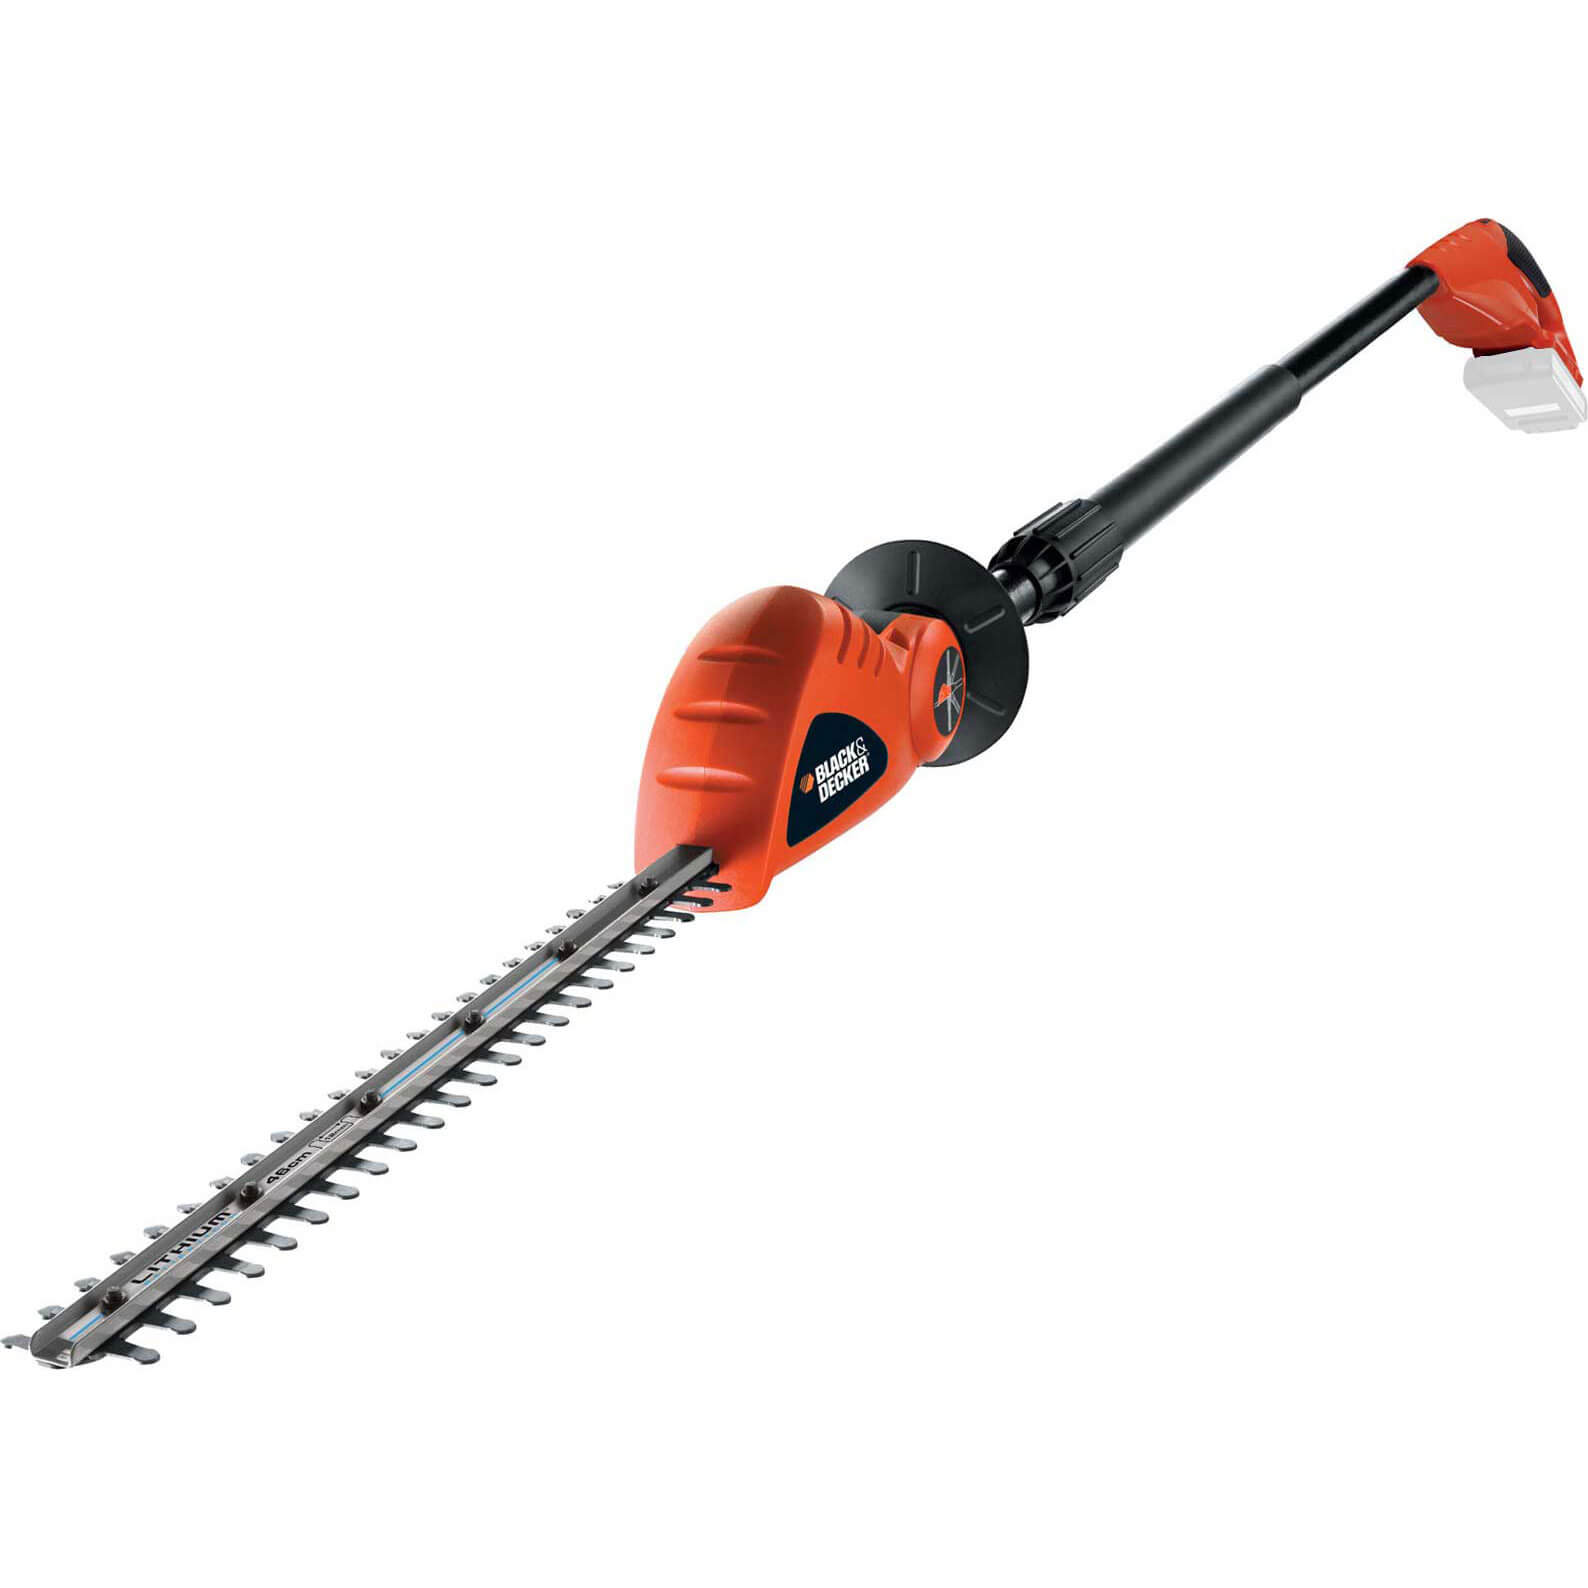 Image of Black and Decker GTC1843L 18v Cordless Long Articulating Hedge Trimmer 430mm No Batteries No Charger